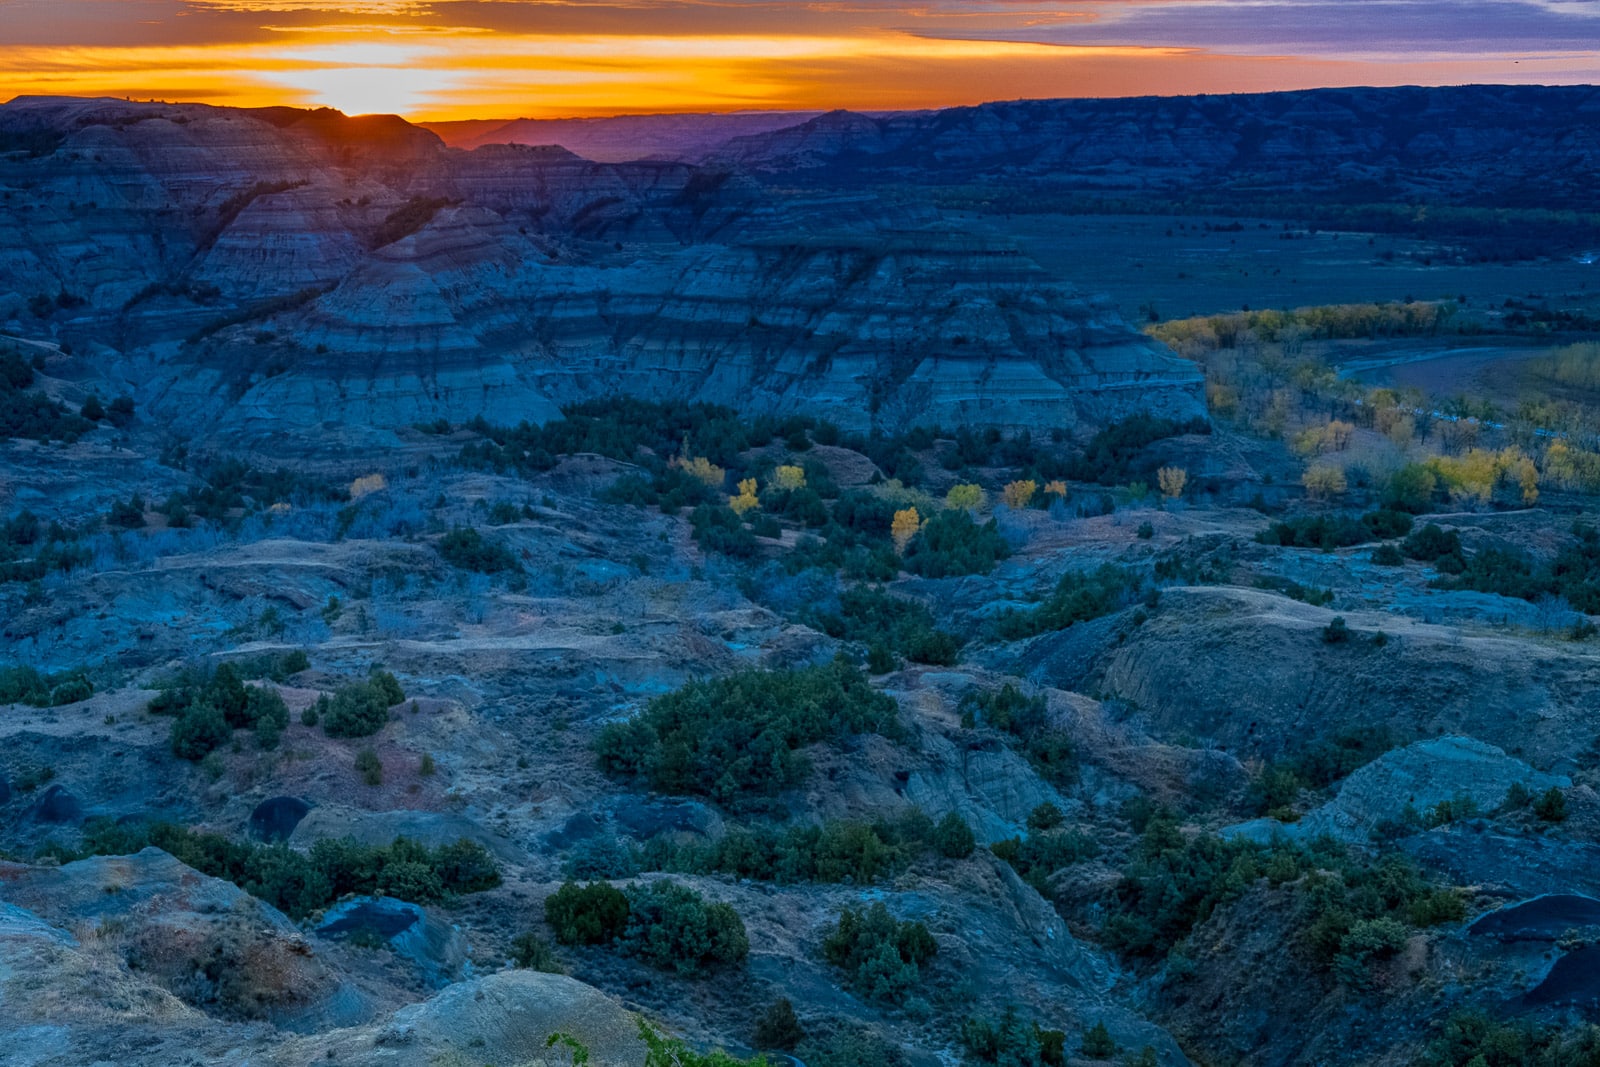 Looking across the badlands to the Little Missouri River at sunrise in the North Unit of Theodore Roosevelt National Park in North Dakota.